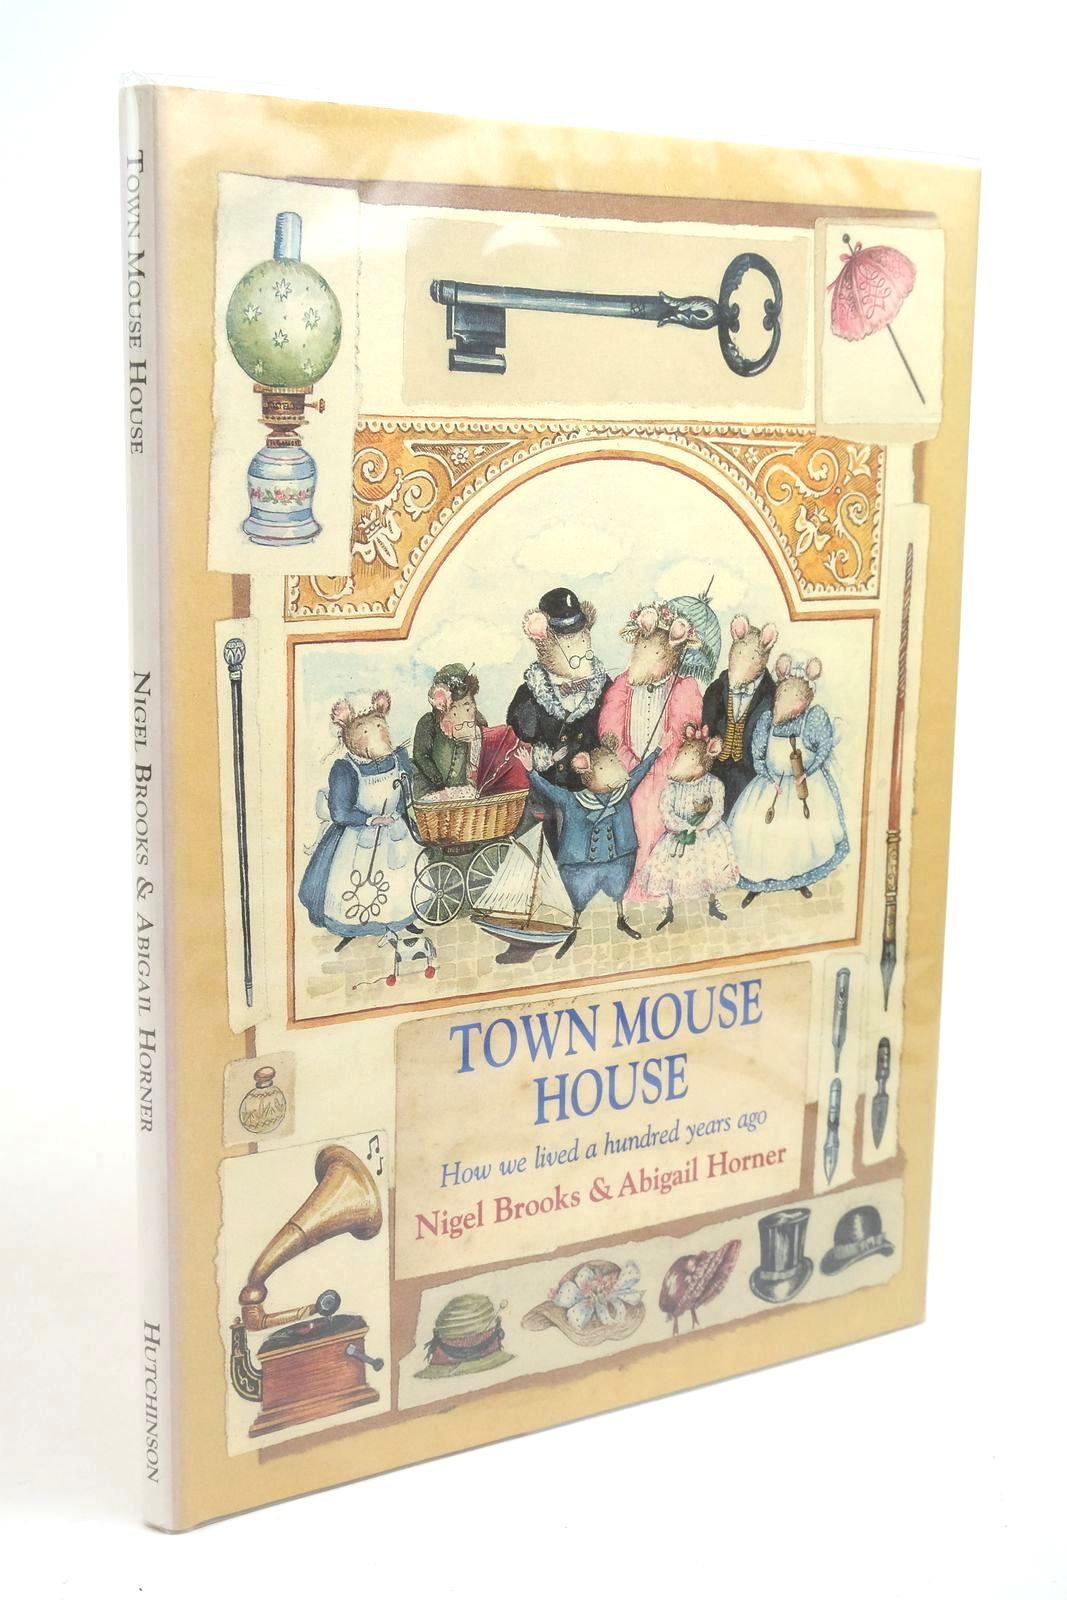 Photo of TOWN MOUSE HOUSE written by Brooks, Nigel illustrated by Horner, Abigail published by Hutchinson (STOCK CODE: 1322358)  for sale by Stella & Rose's Books